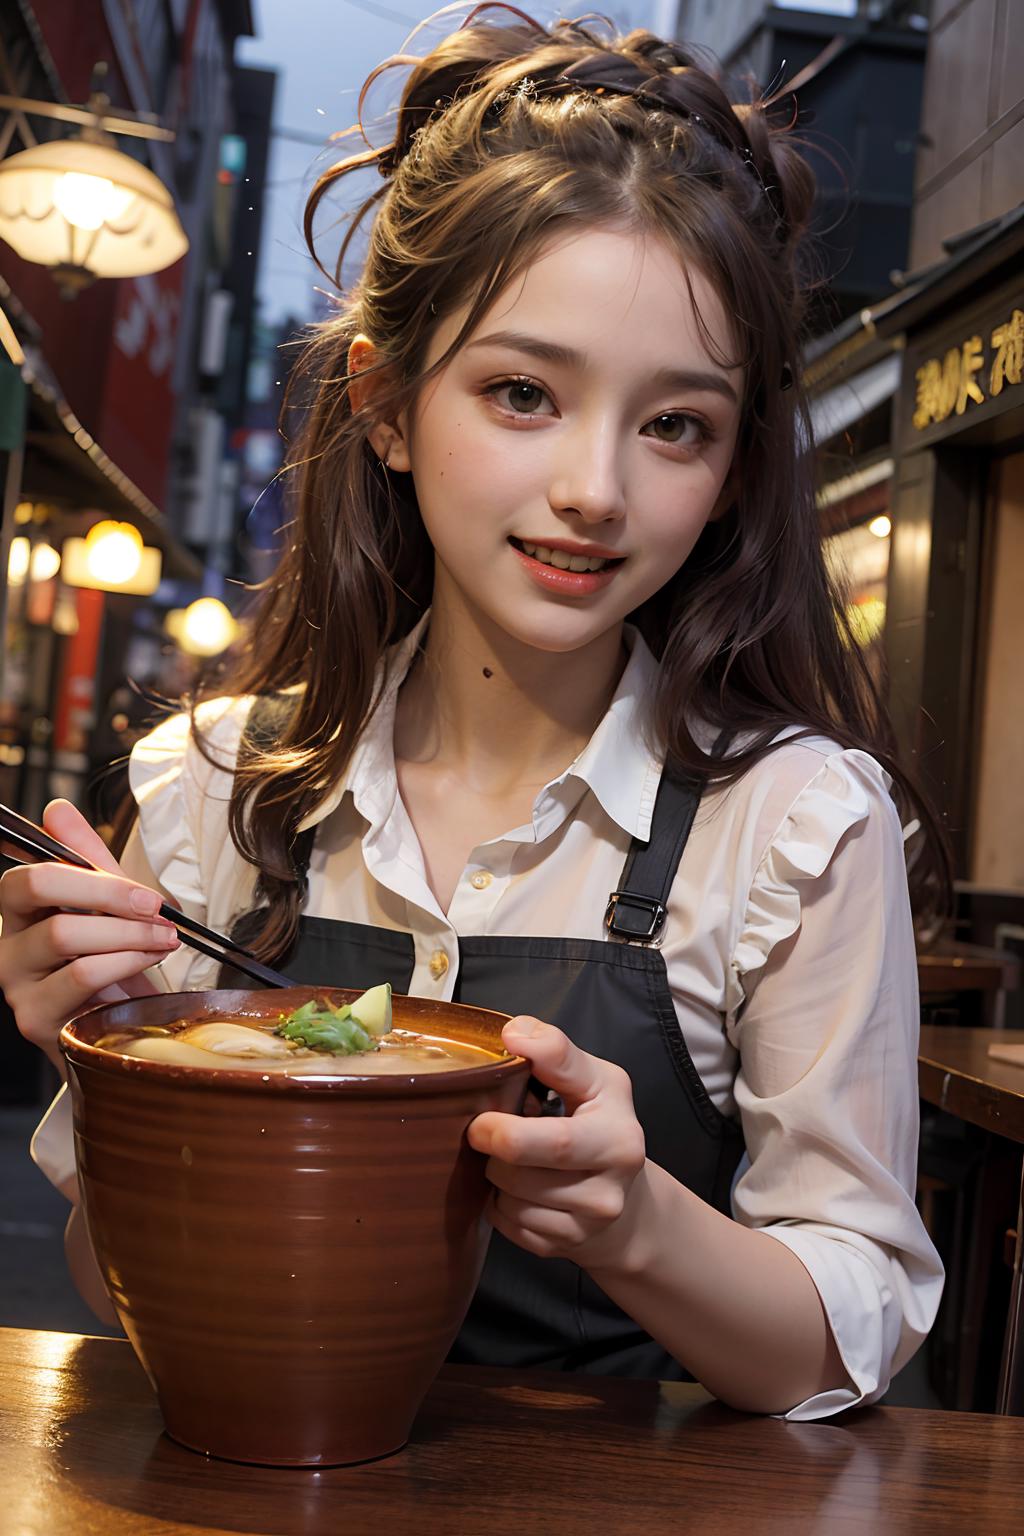 A young woman holding a bowl of soup with a spoon in her hand.